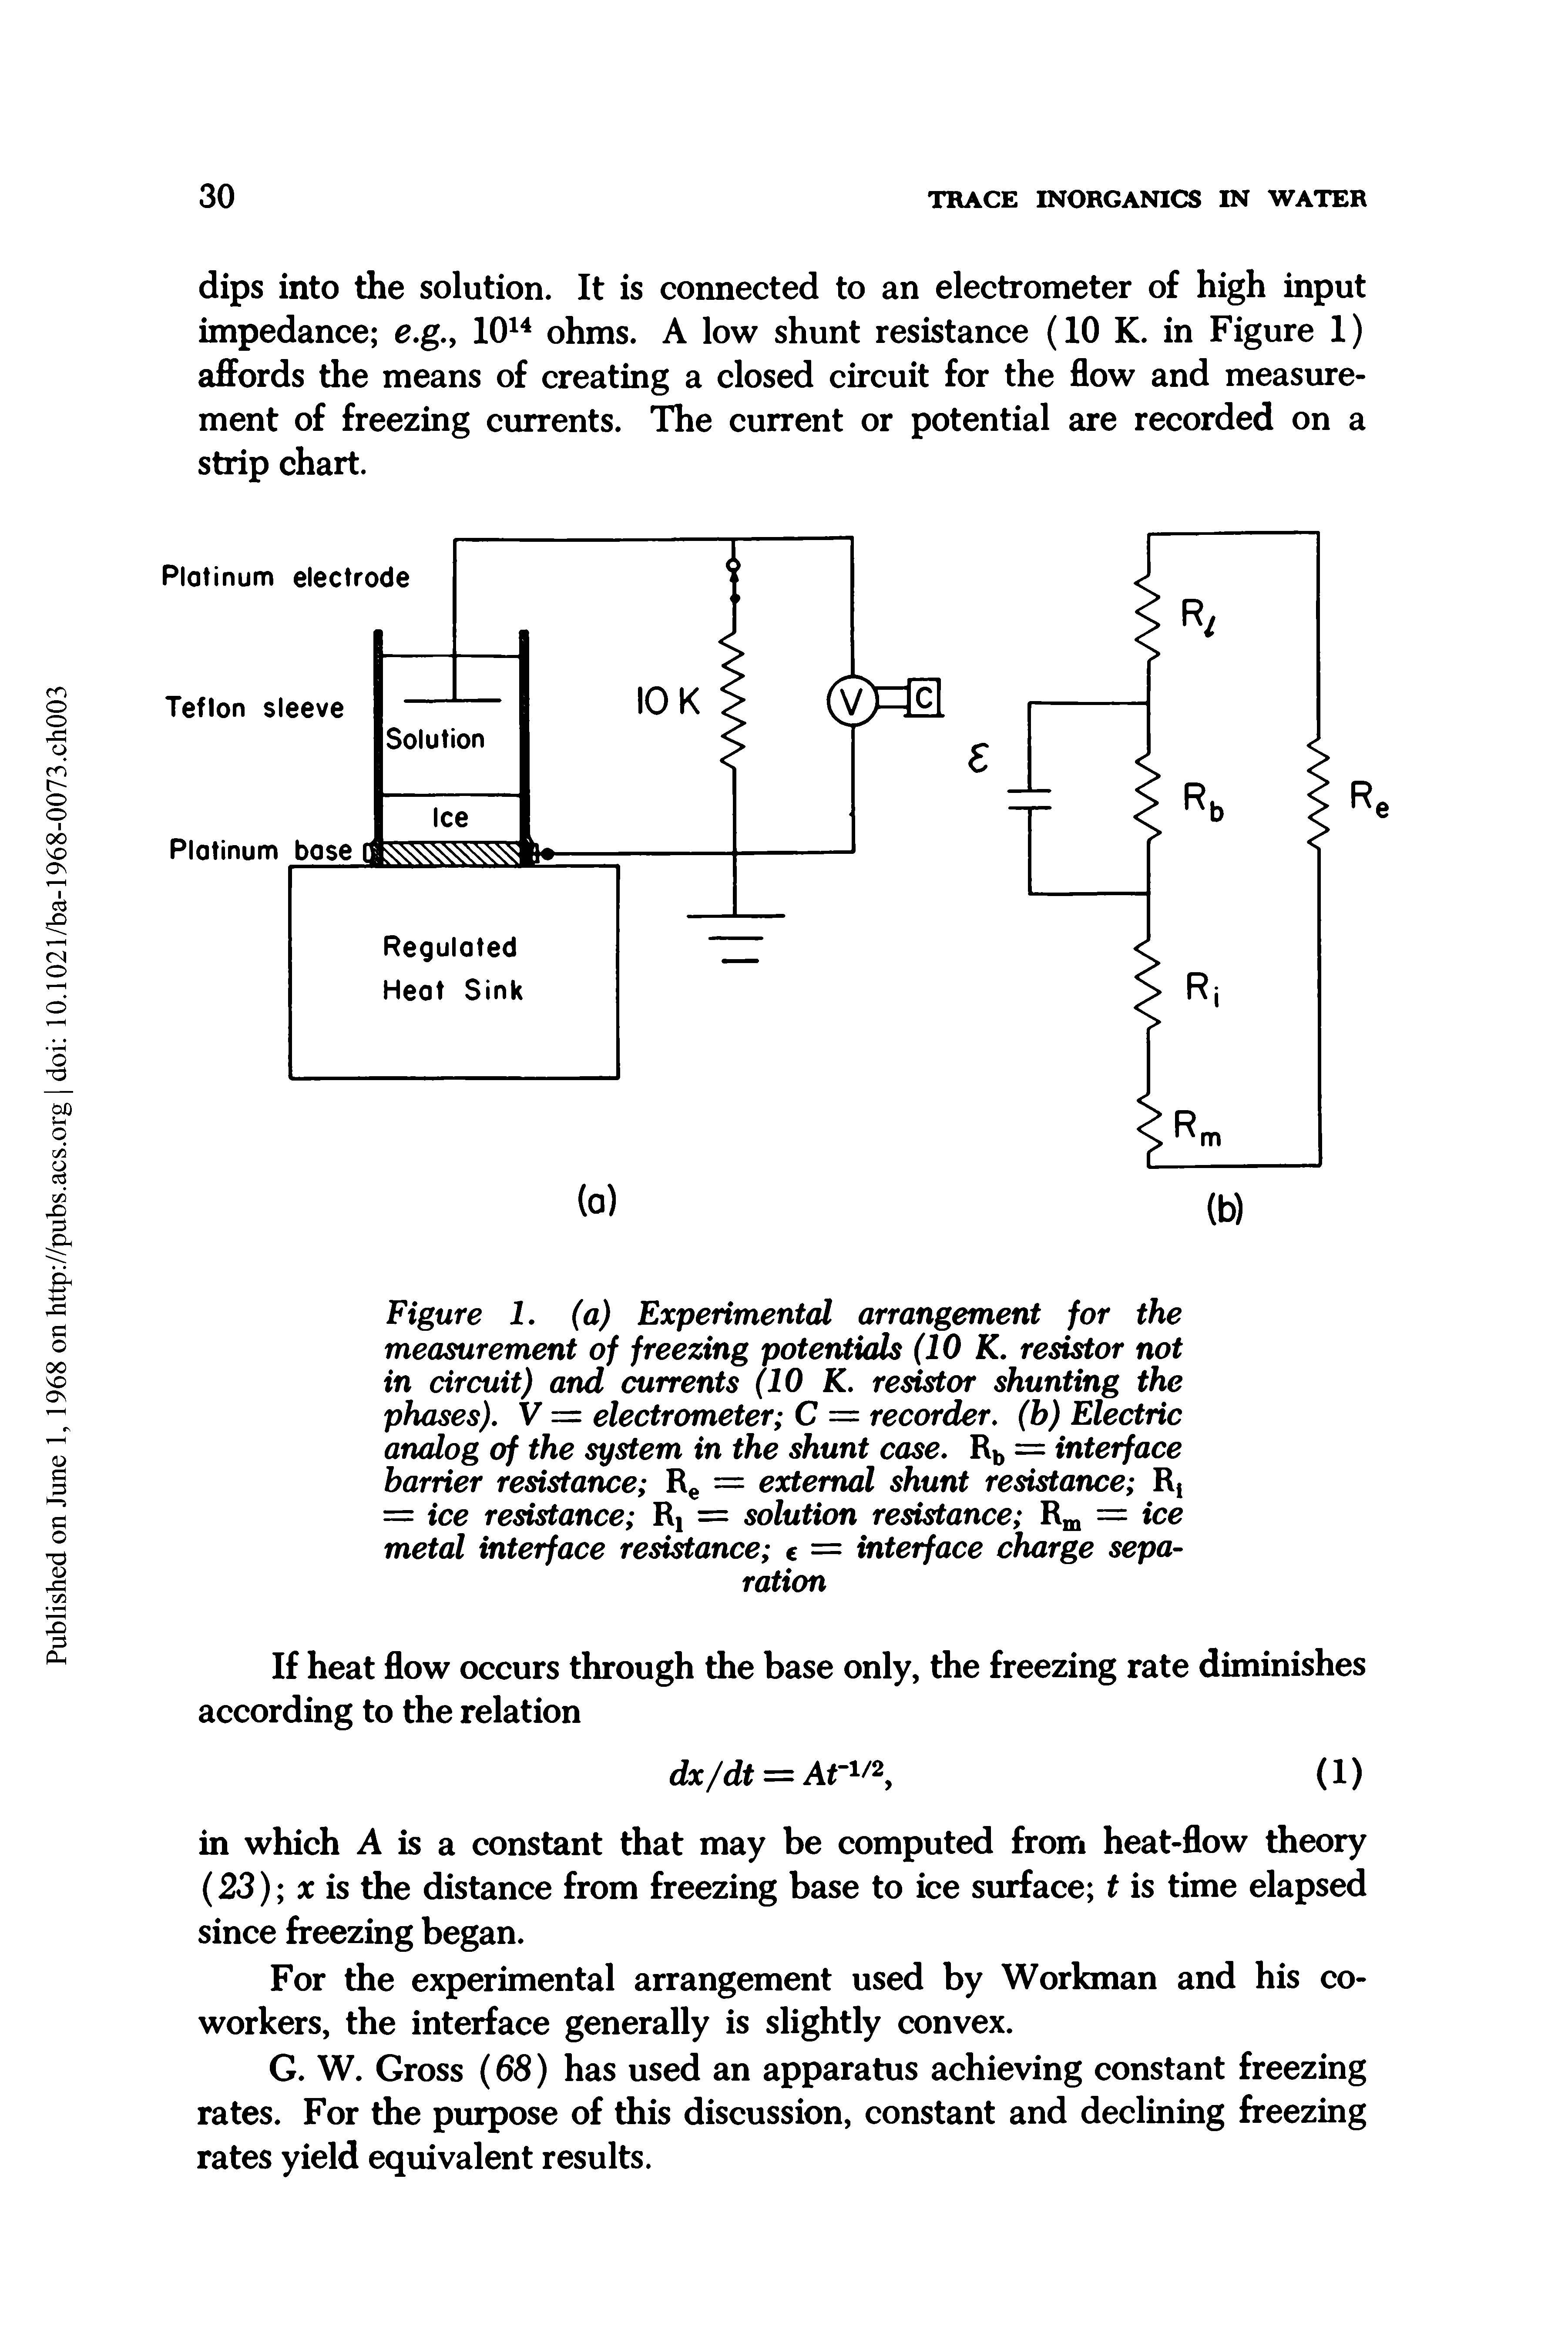 Figure I. (a) Experimental arrangement for the measurement of freezing potentials (10 K, resistor not in circuit) and currents (10 K. resistor shunting the phases), V = electrometer C = recorder, (b) Electric analog of the system in the shunt case, Rb = interface barrier resistance = external shunt resistance Rj = ice resistance Ri = solution resistance Rm = ice metal interface resistance c = interface charge separation...